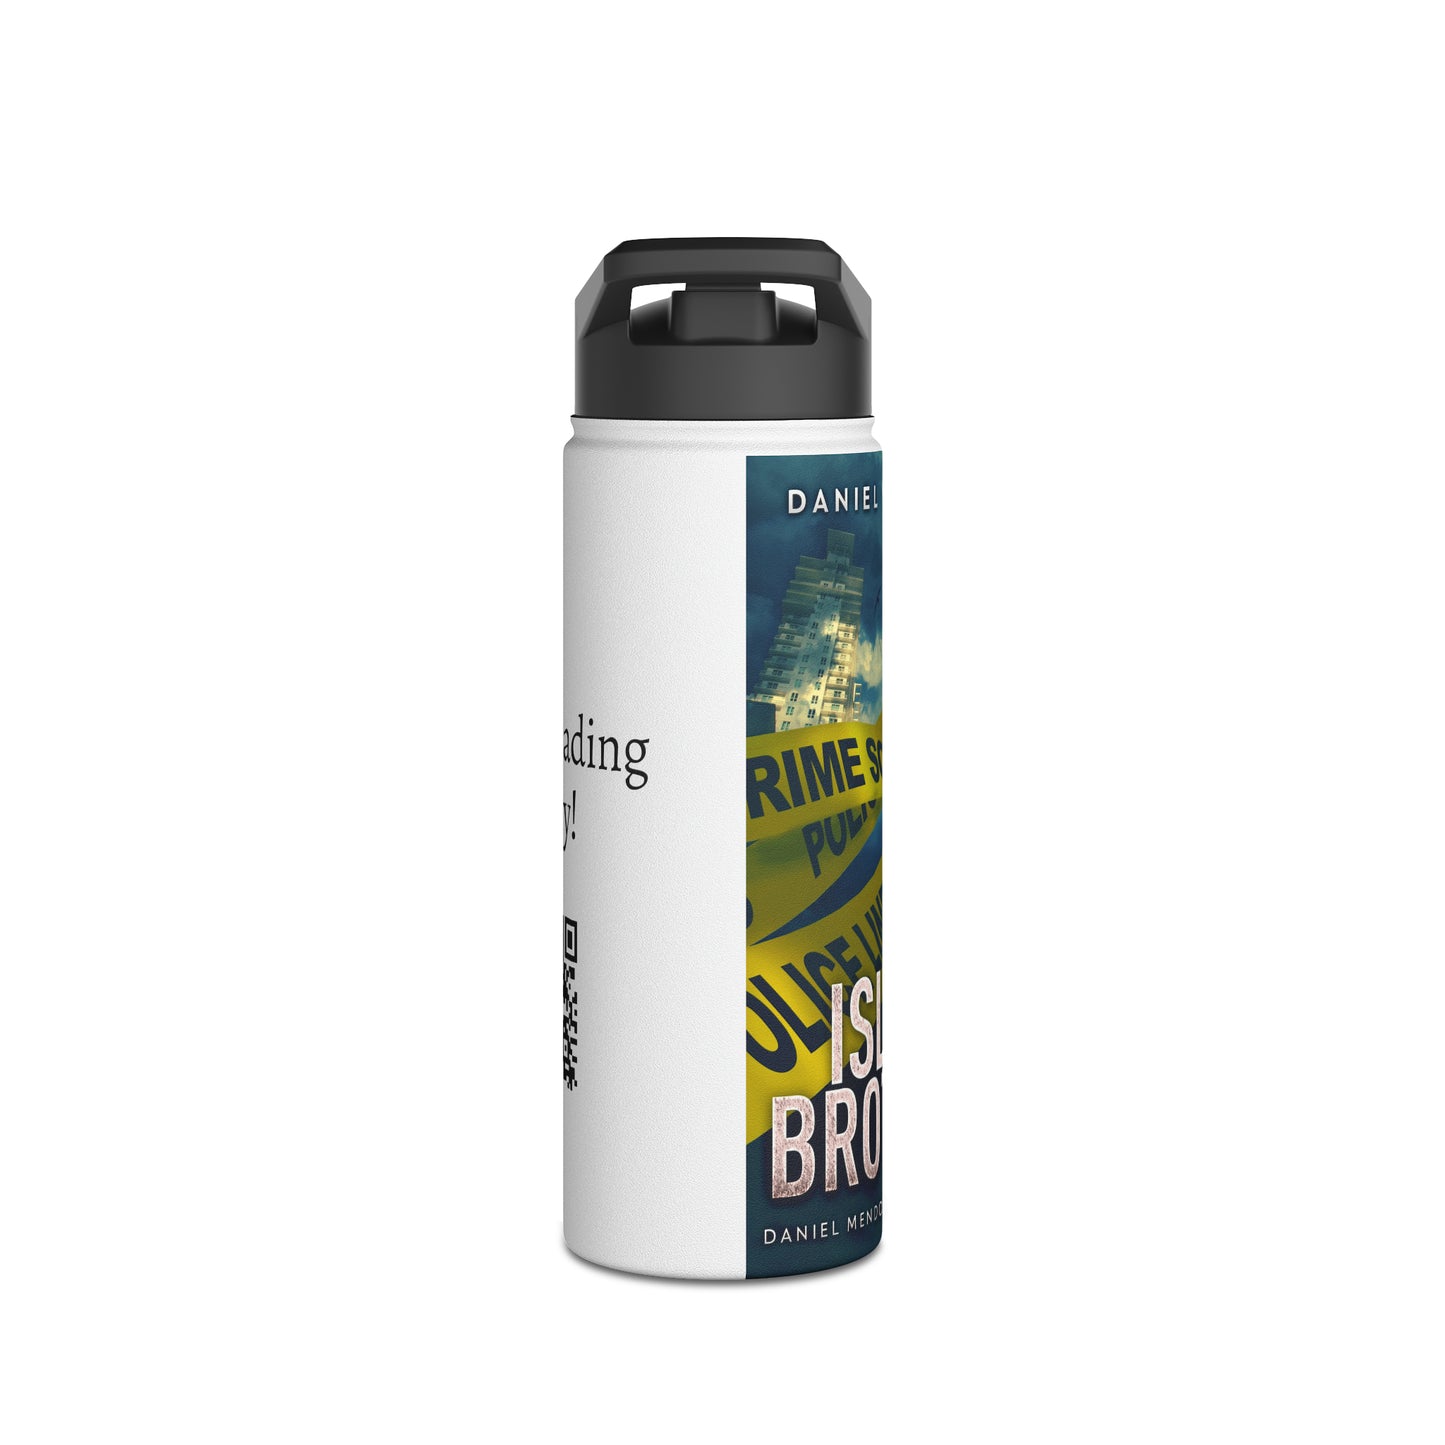 Island Brothers - Stainless Steel Water Bottle